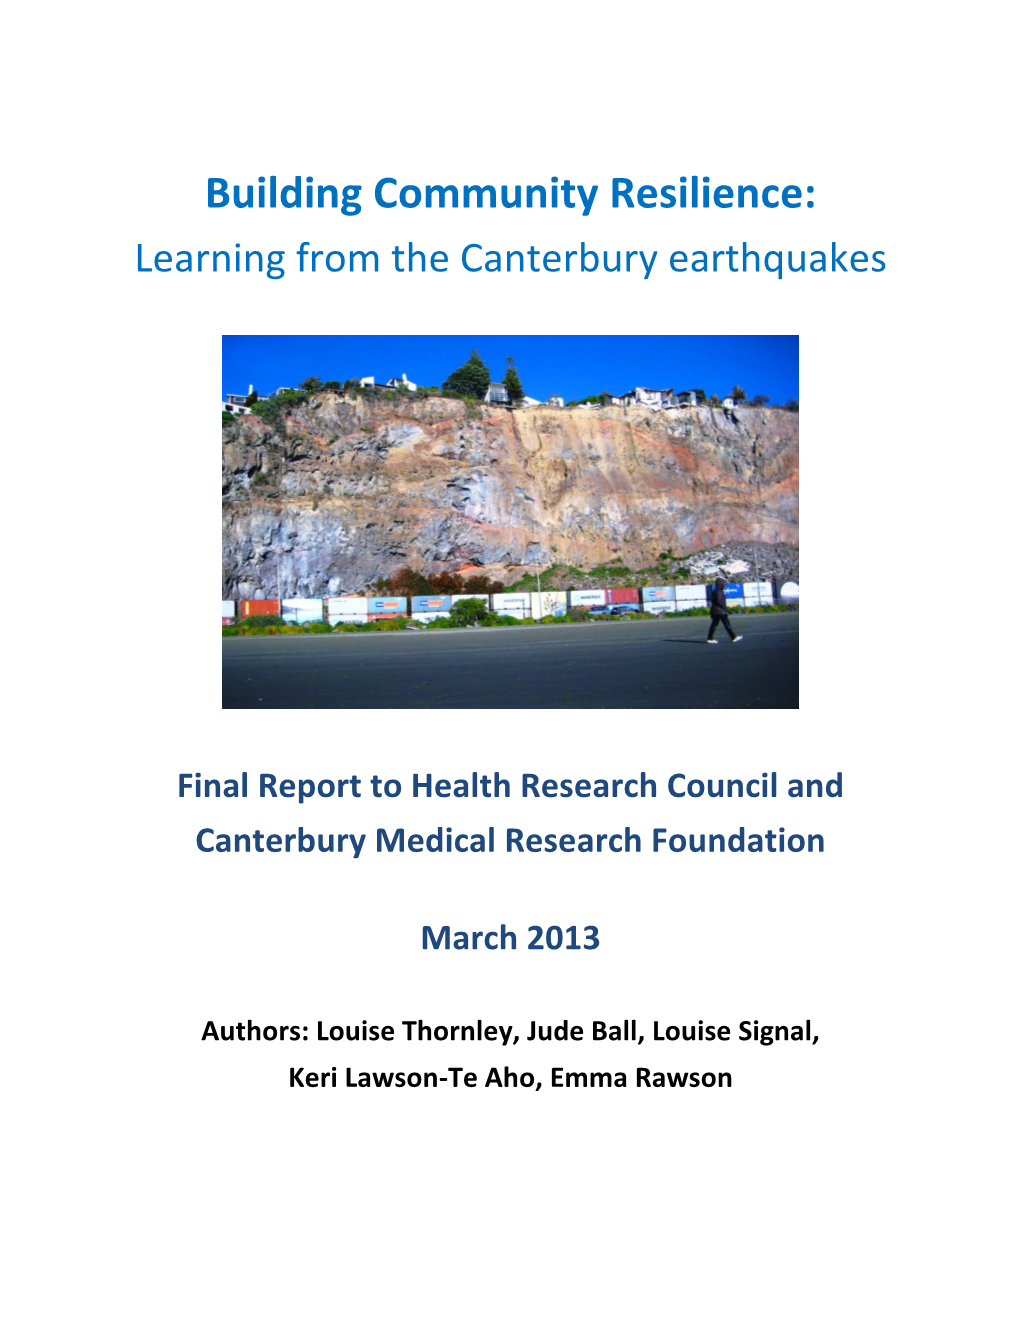 Building Community Resilience: Learning from the Canterbury Earthquakes